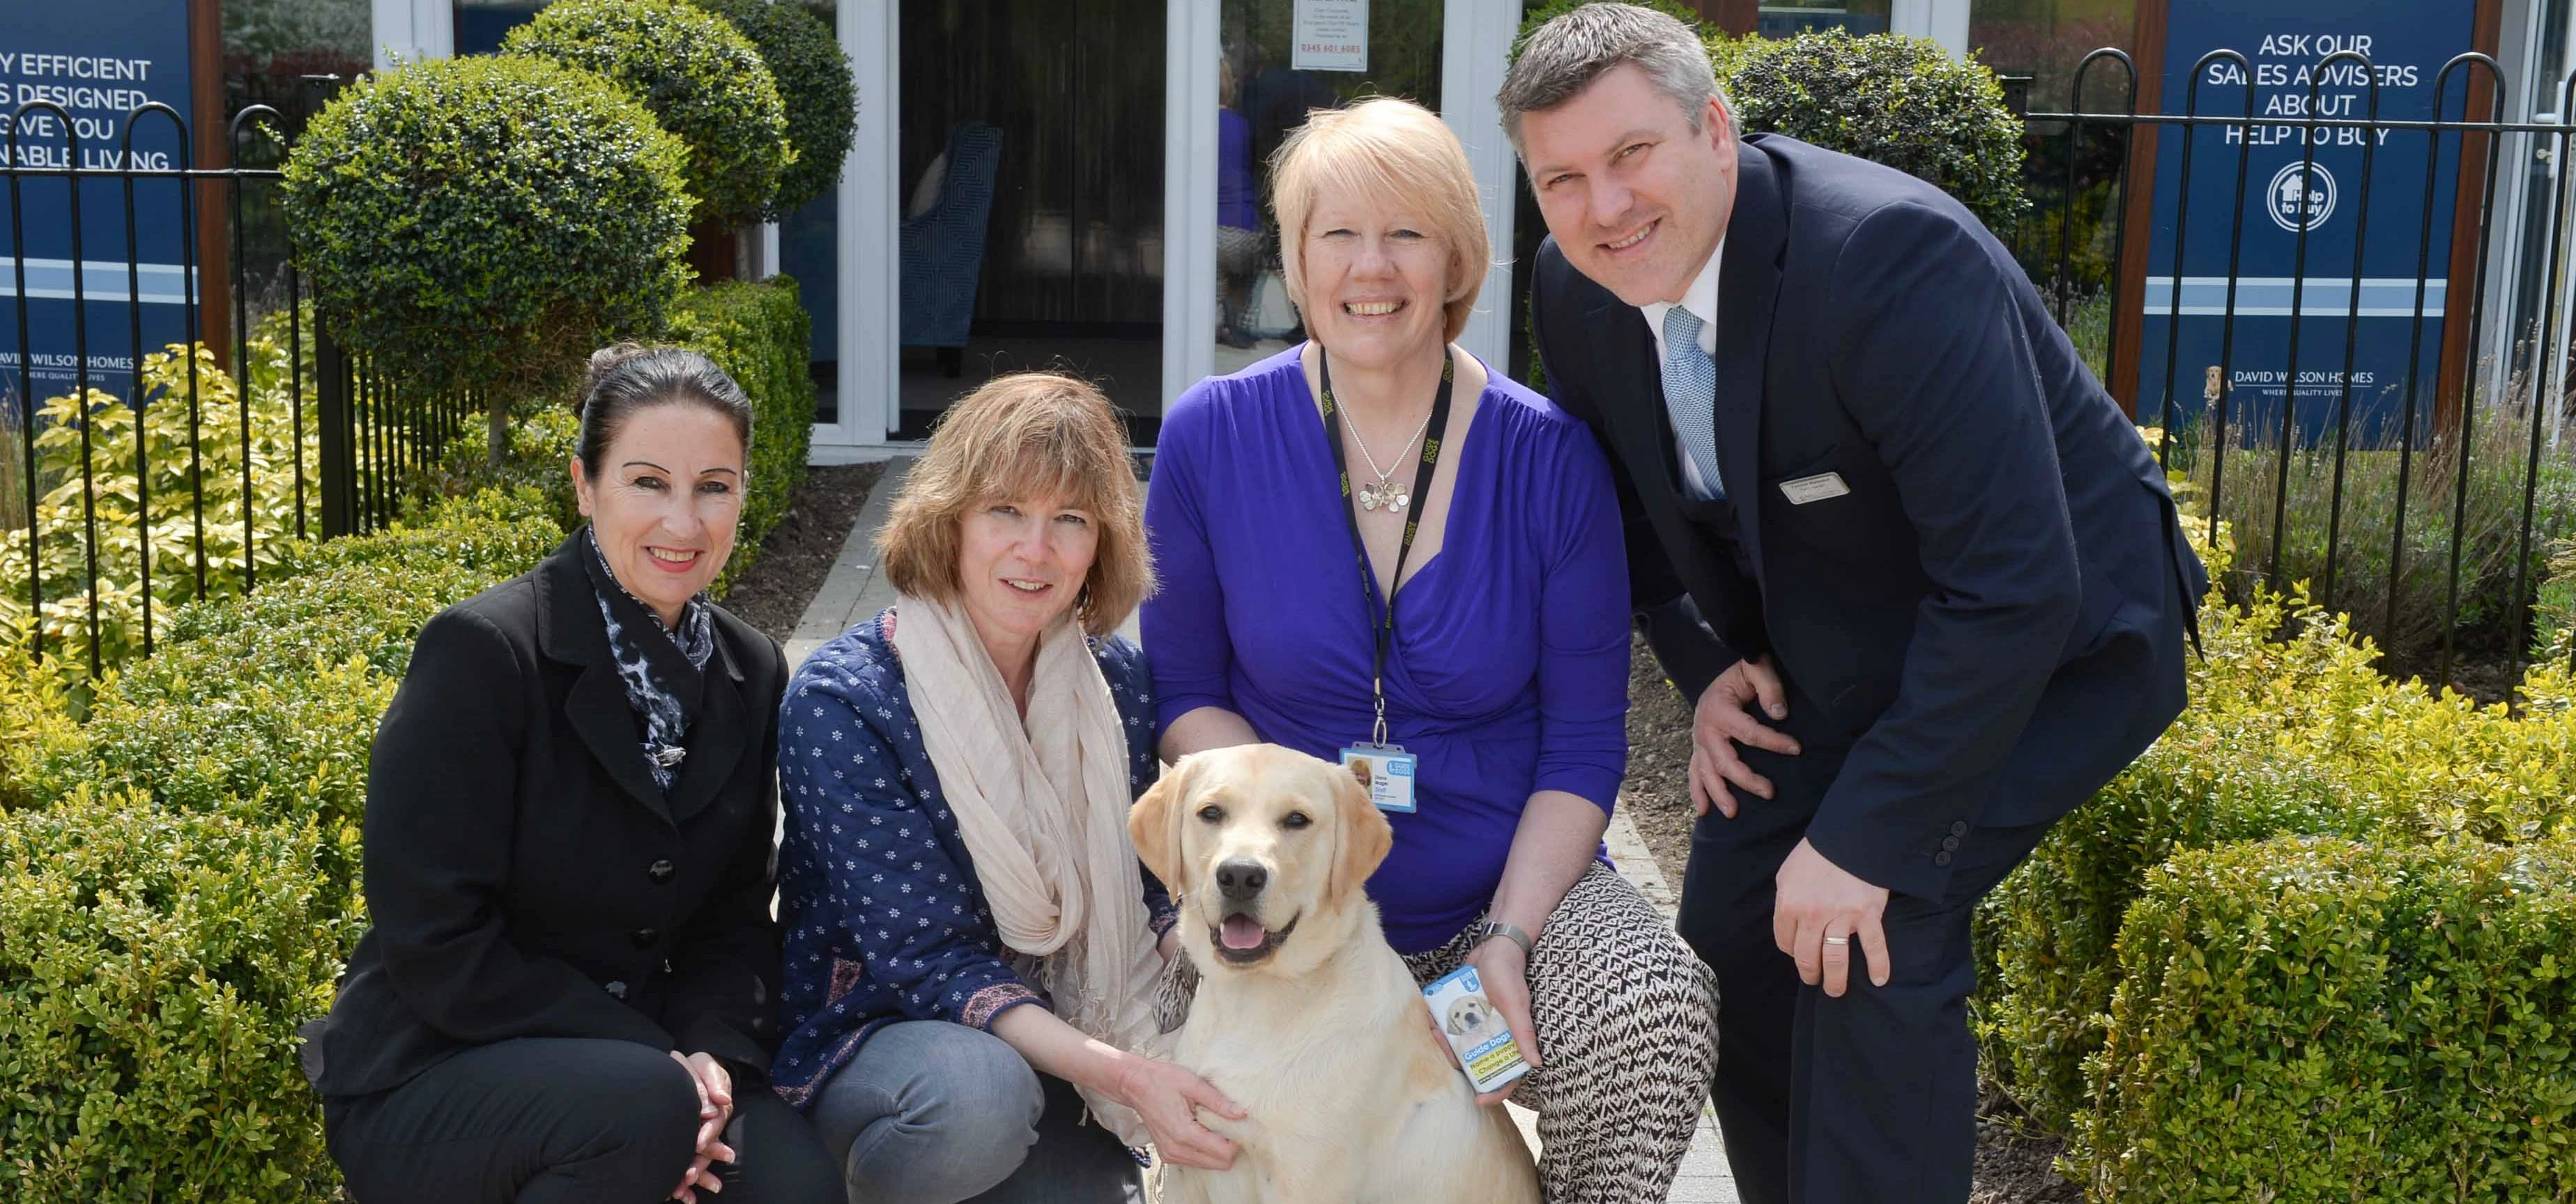 David Wilson Homes North West colleagues met the guide dog they sponsored at the company's Meadow Vi